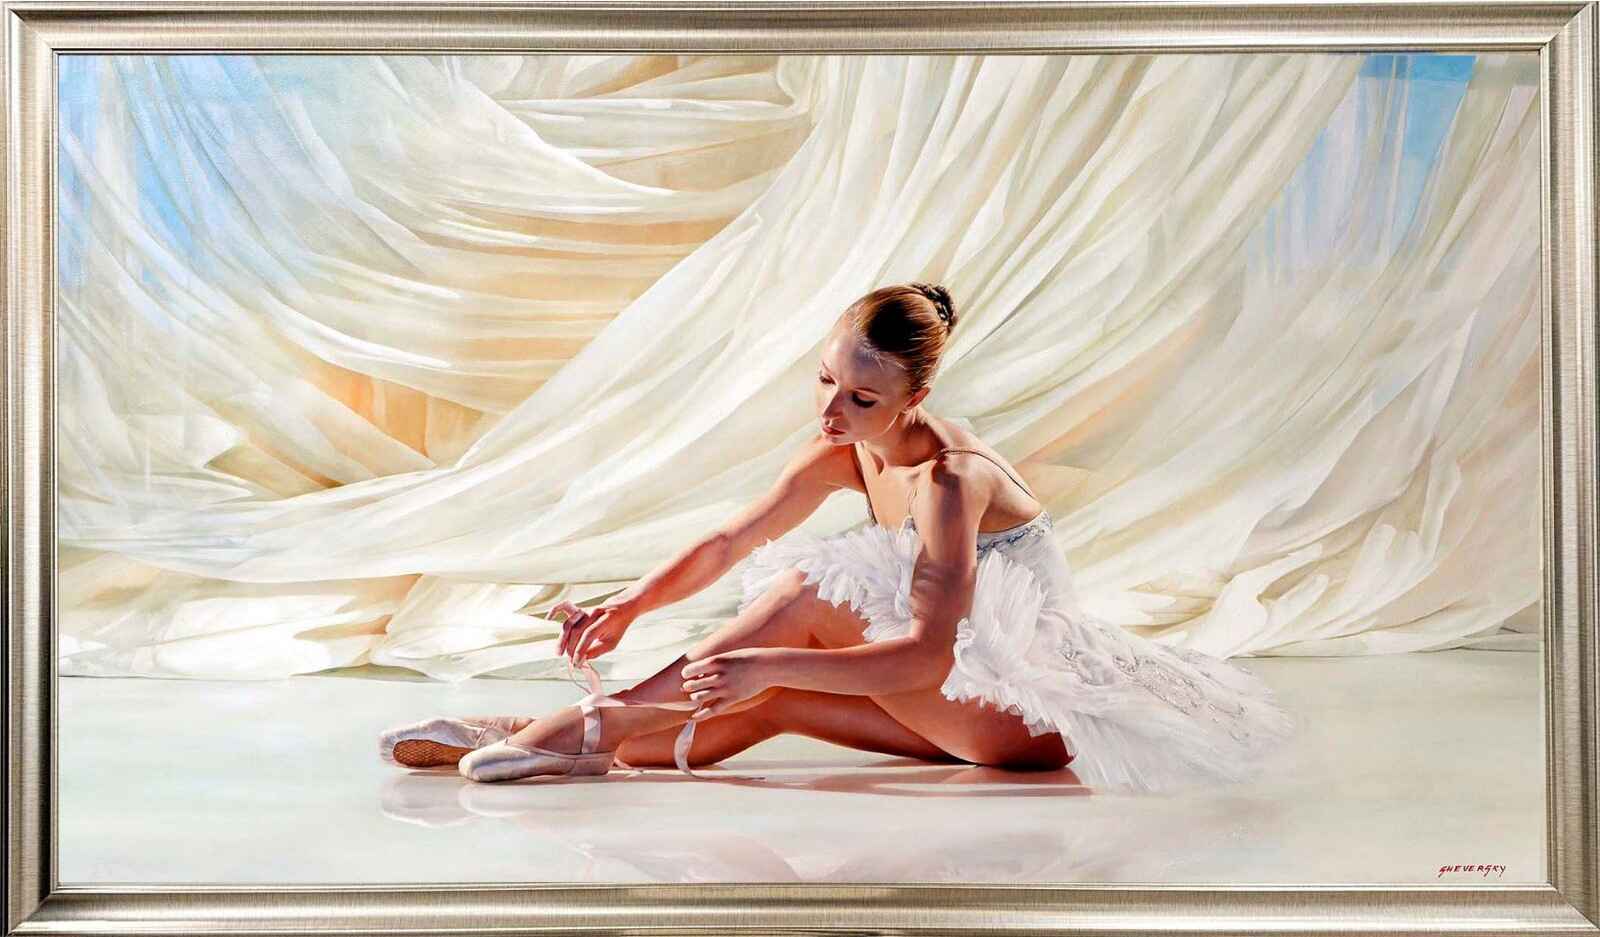 Contemporary art. Title: White Swan, Oil on Canvas, 40x72 in, Framed by Canadian artist Alexander Sheversky.